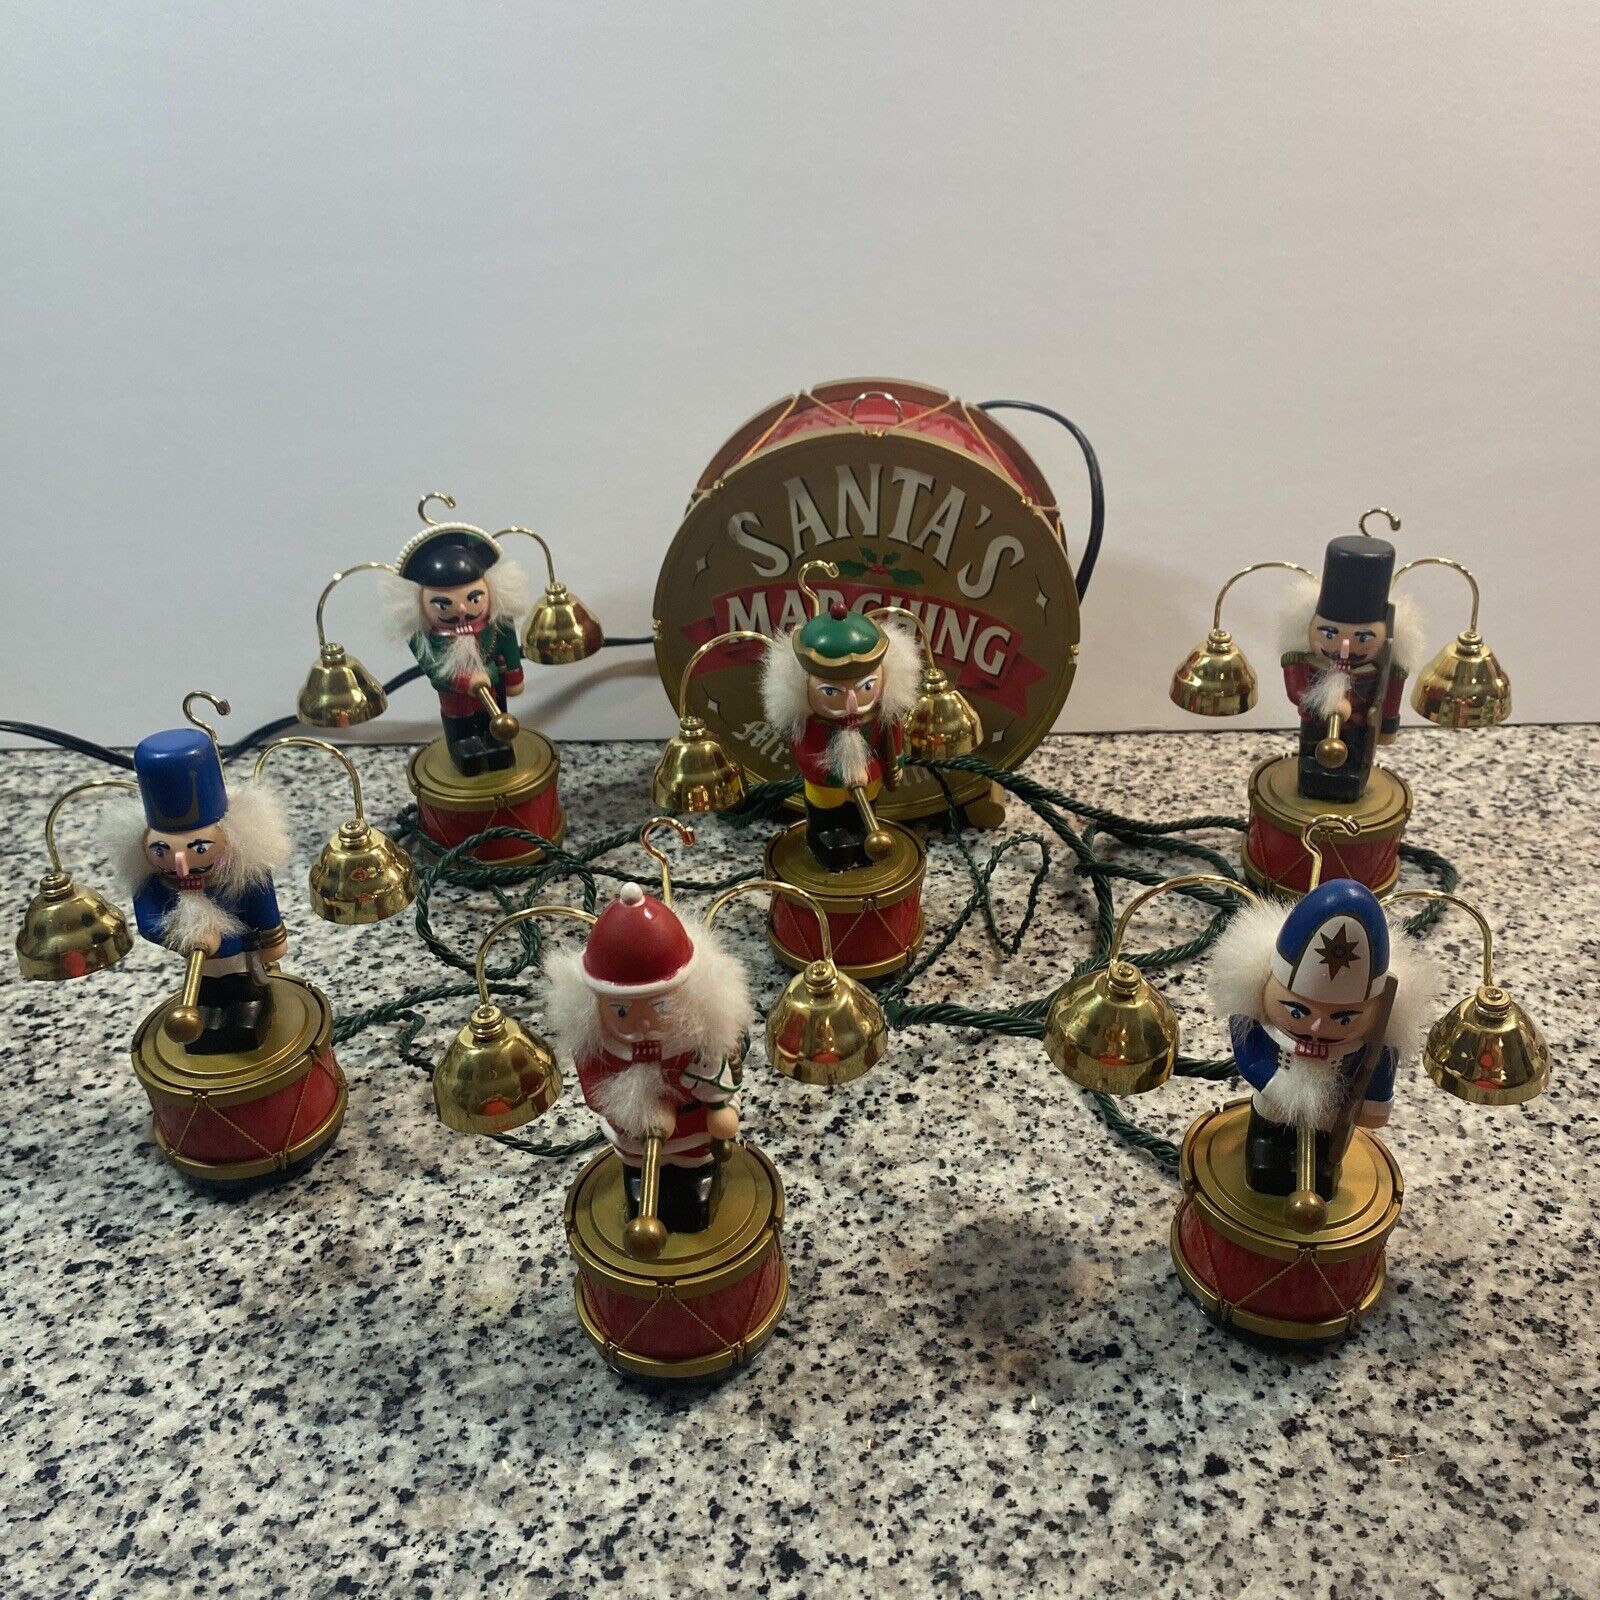 Vintage 1994 Mr. Christmas Santa's Marching Band 6 Piece Musical Nutcrackers 